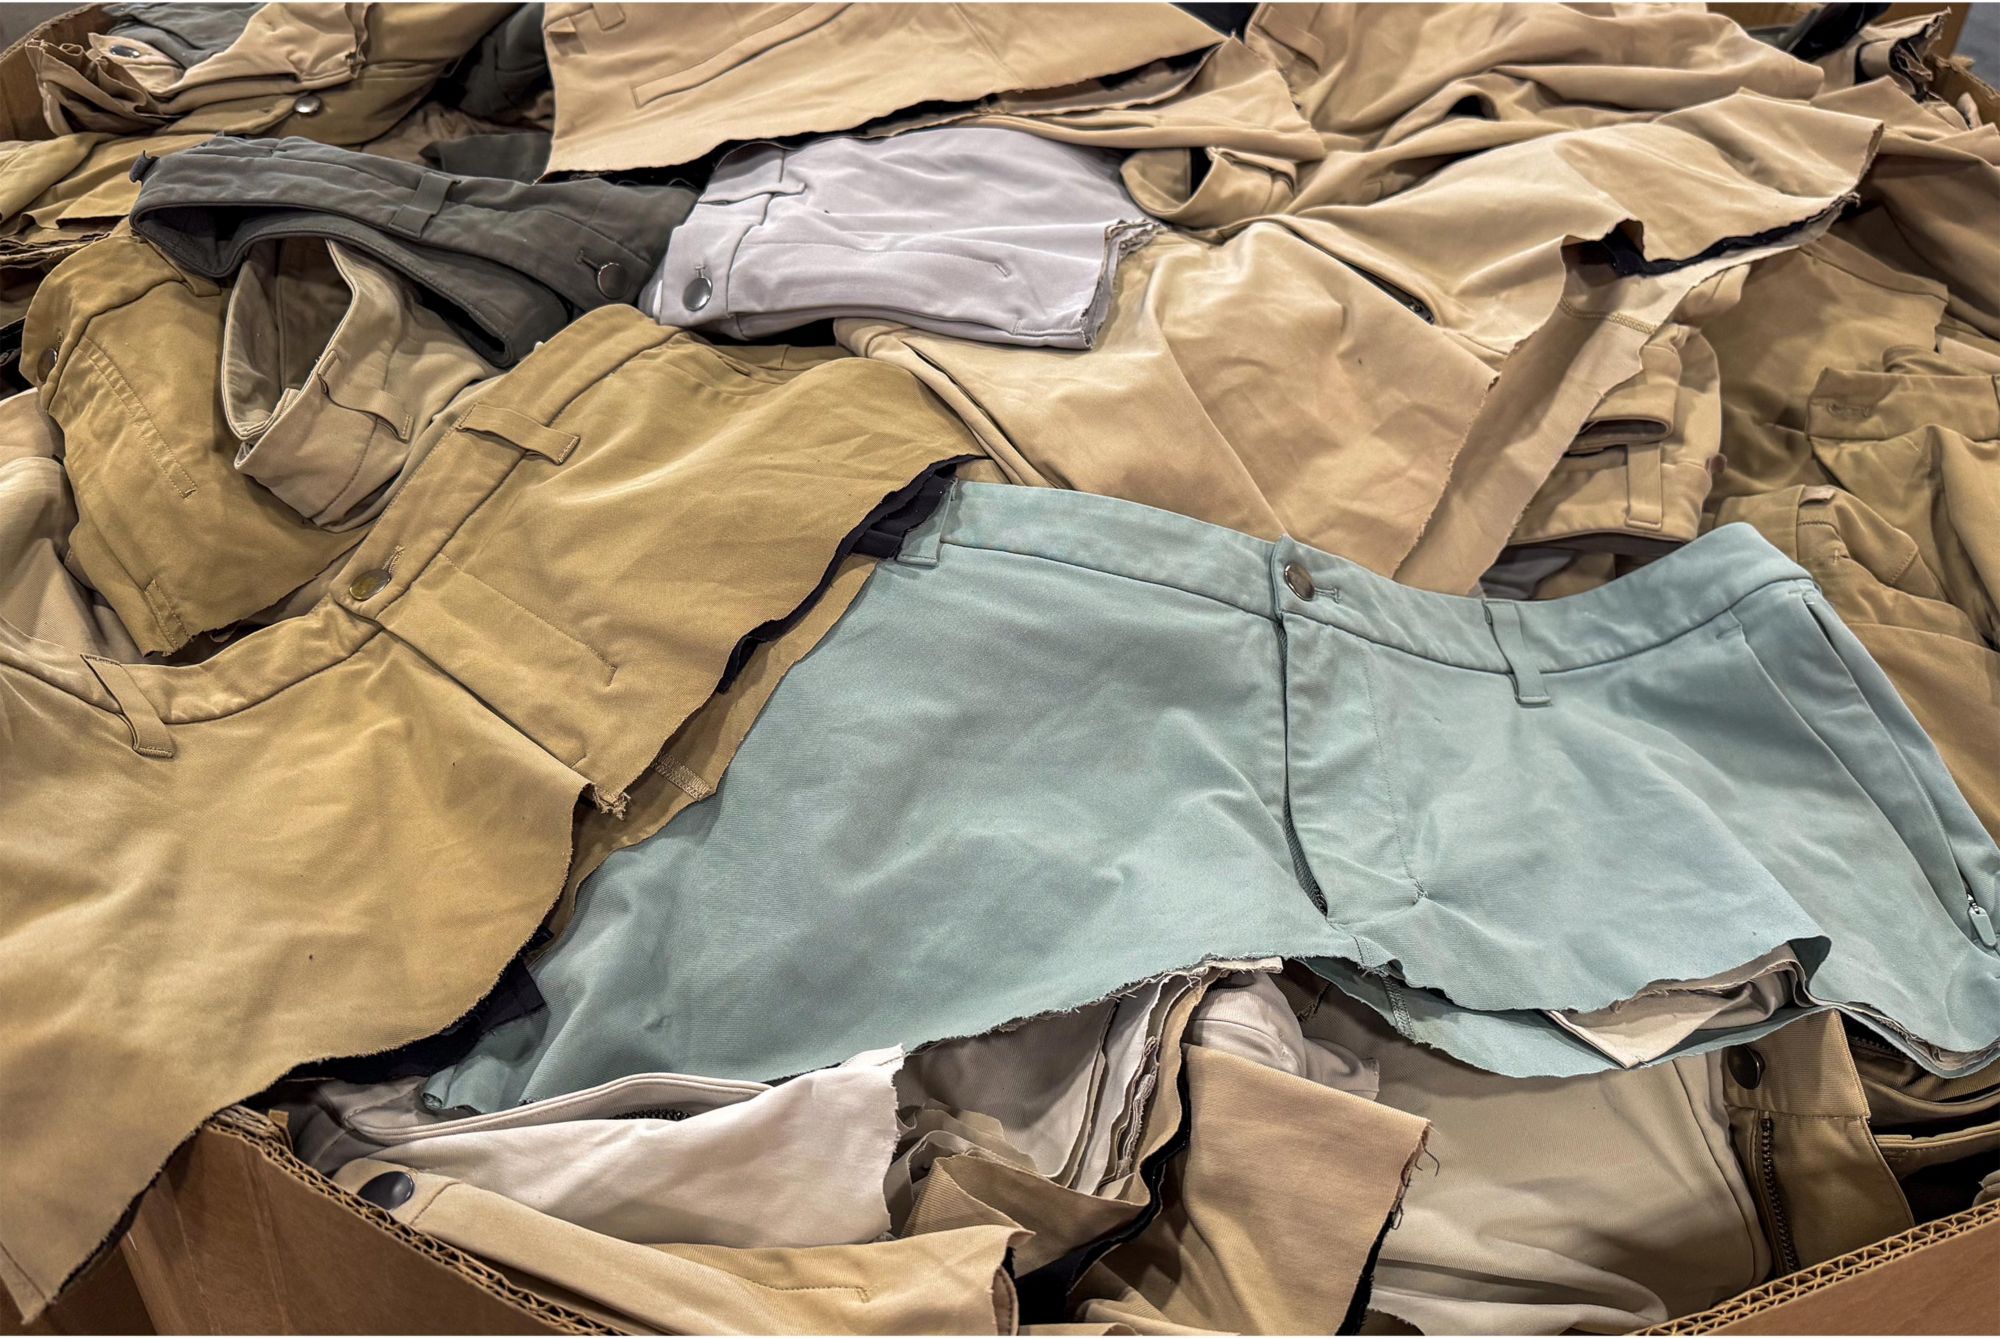 Discarded pants in a pile for recycling 